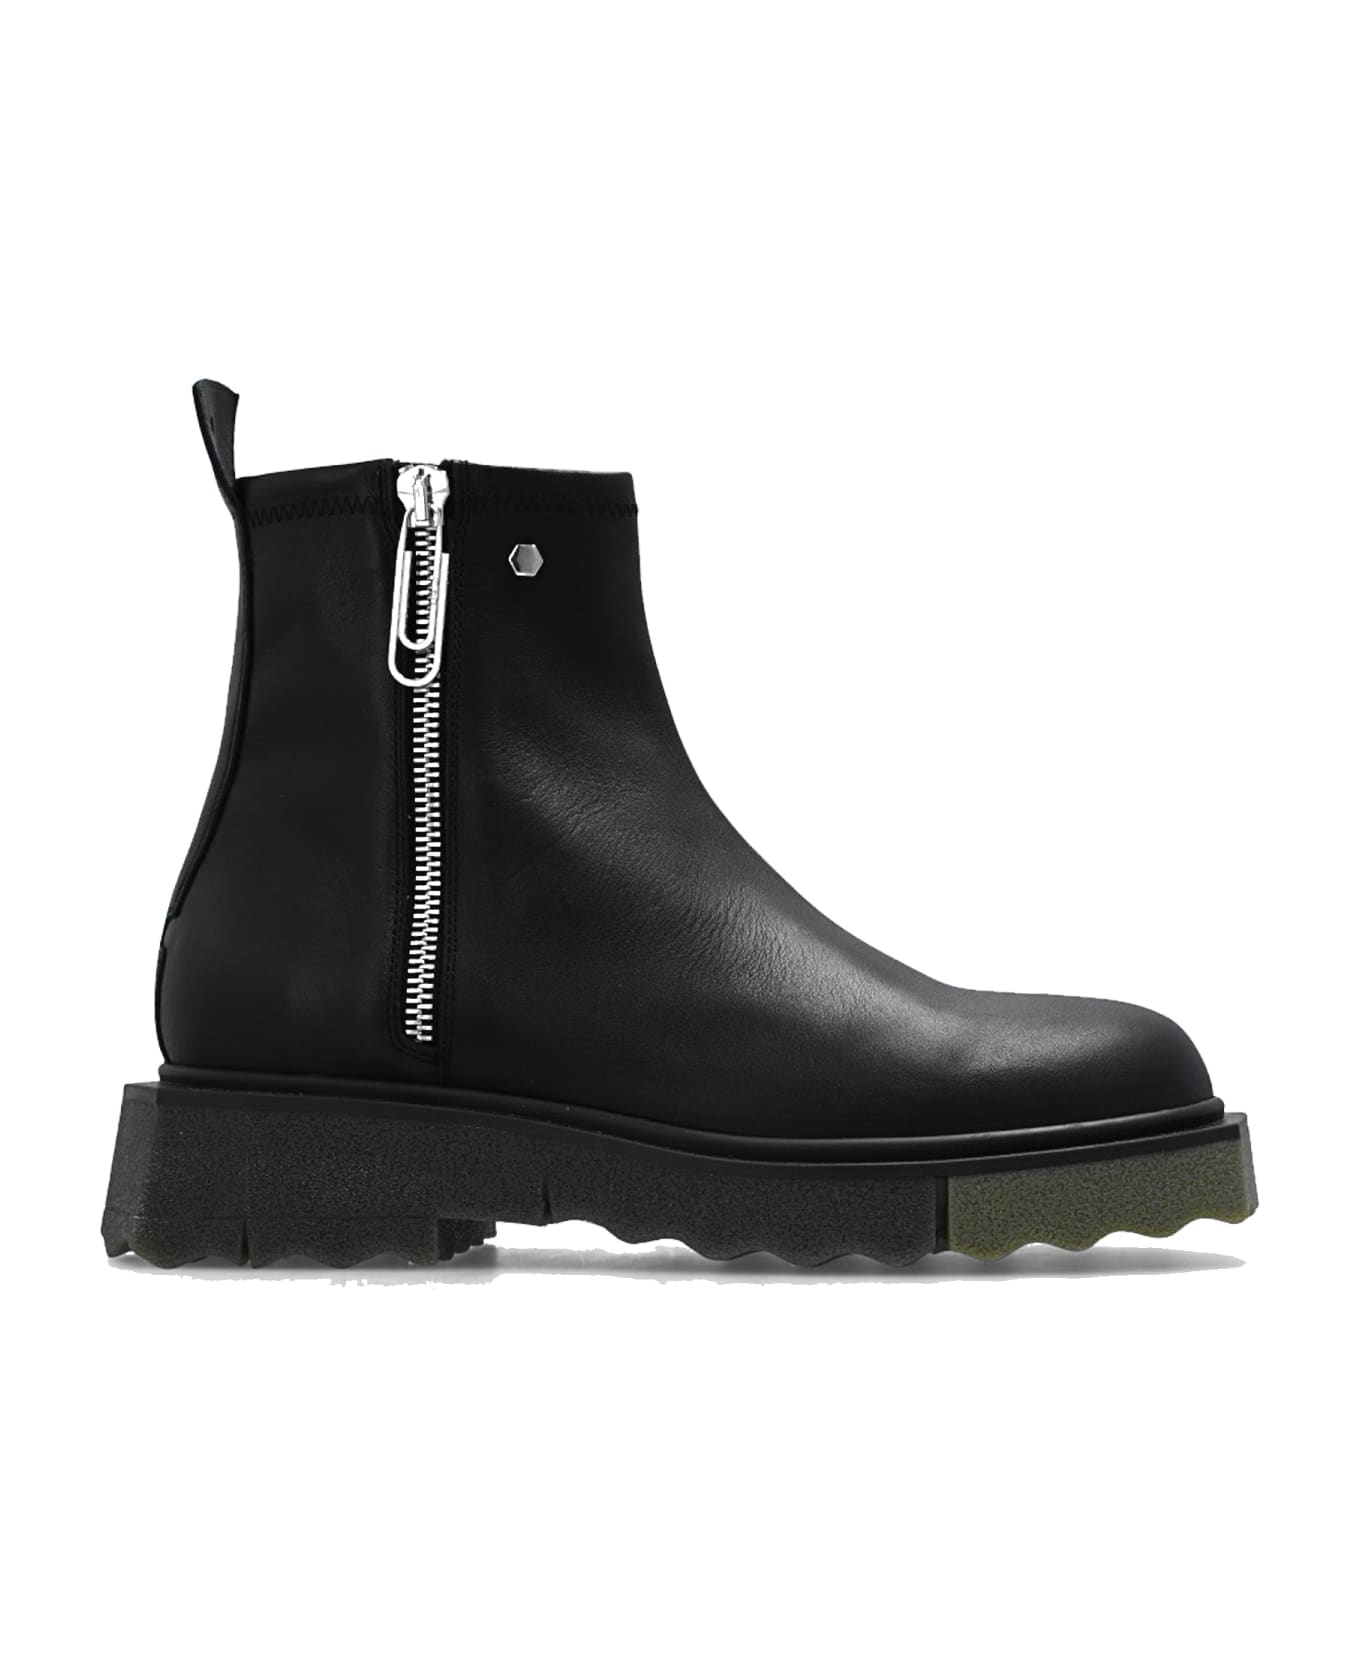 Off-White Ankle Leather Boots - Black ブーツ